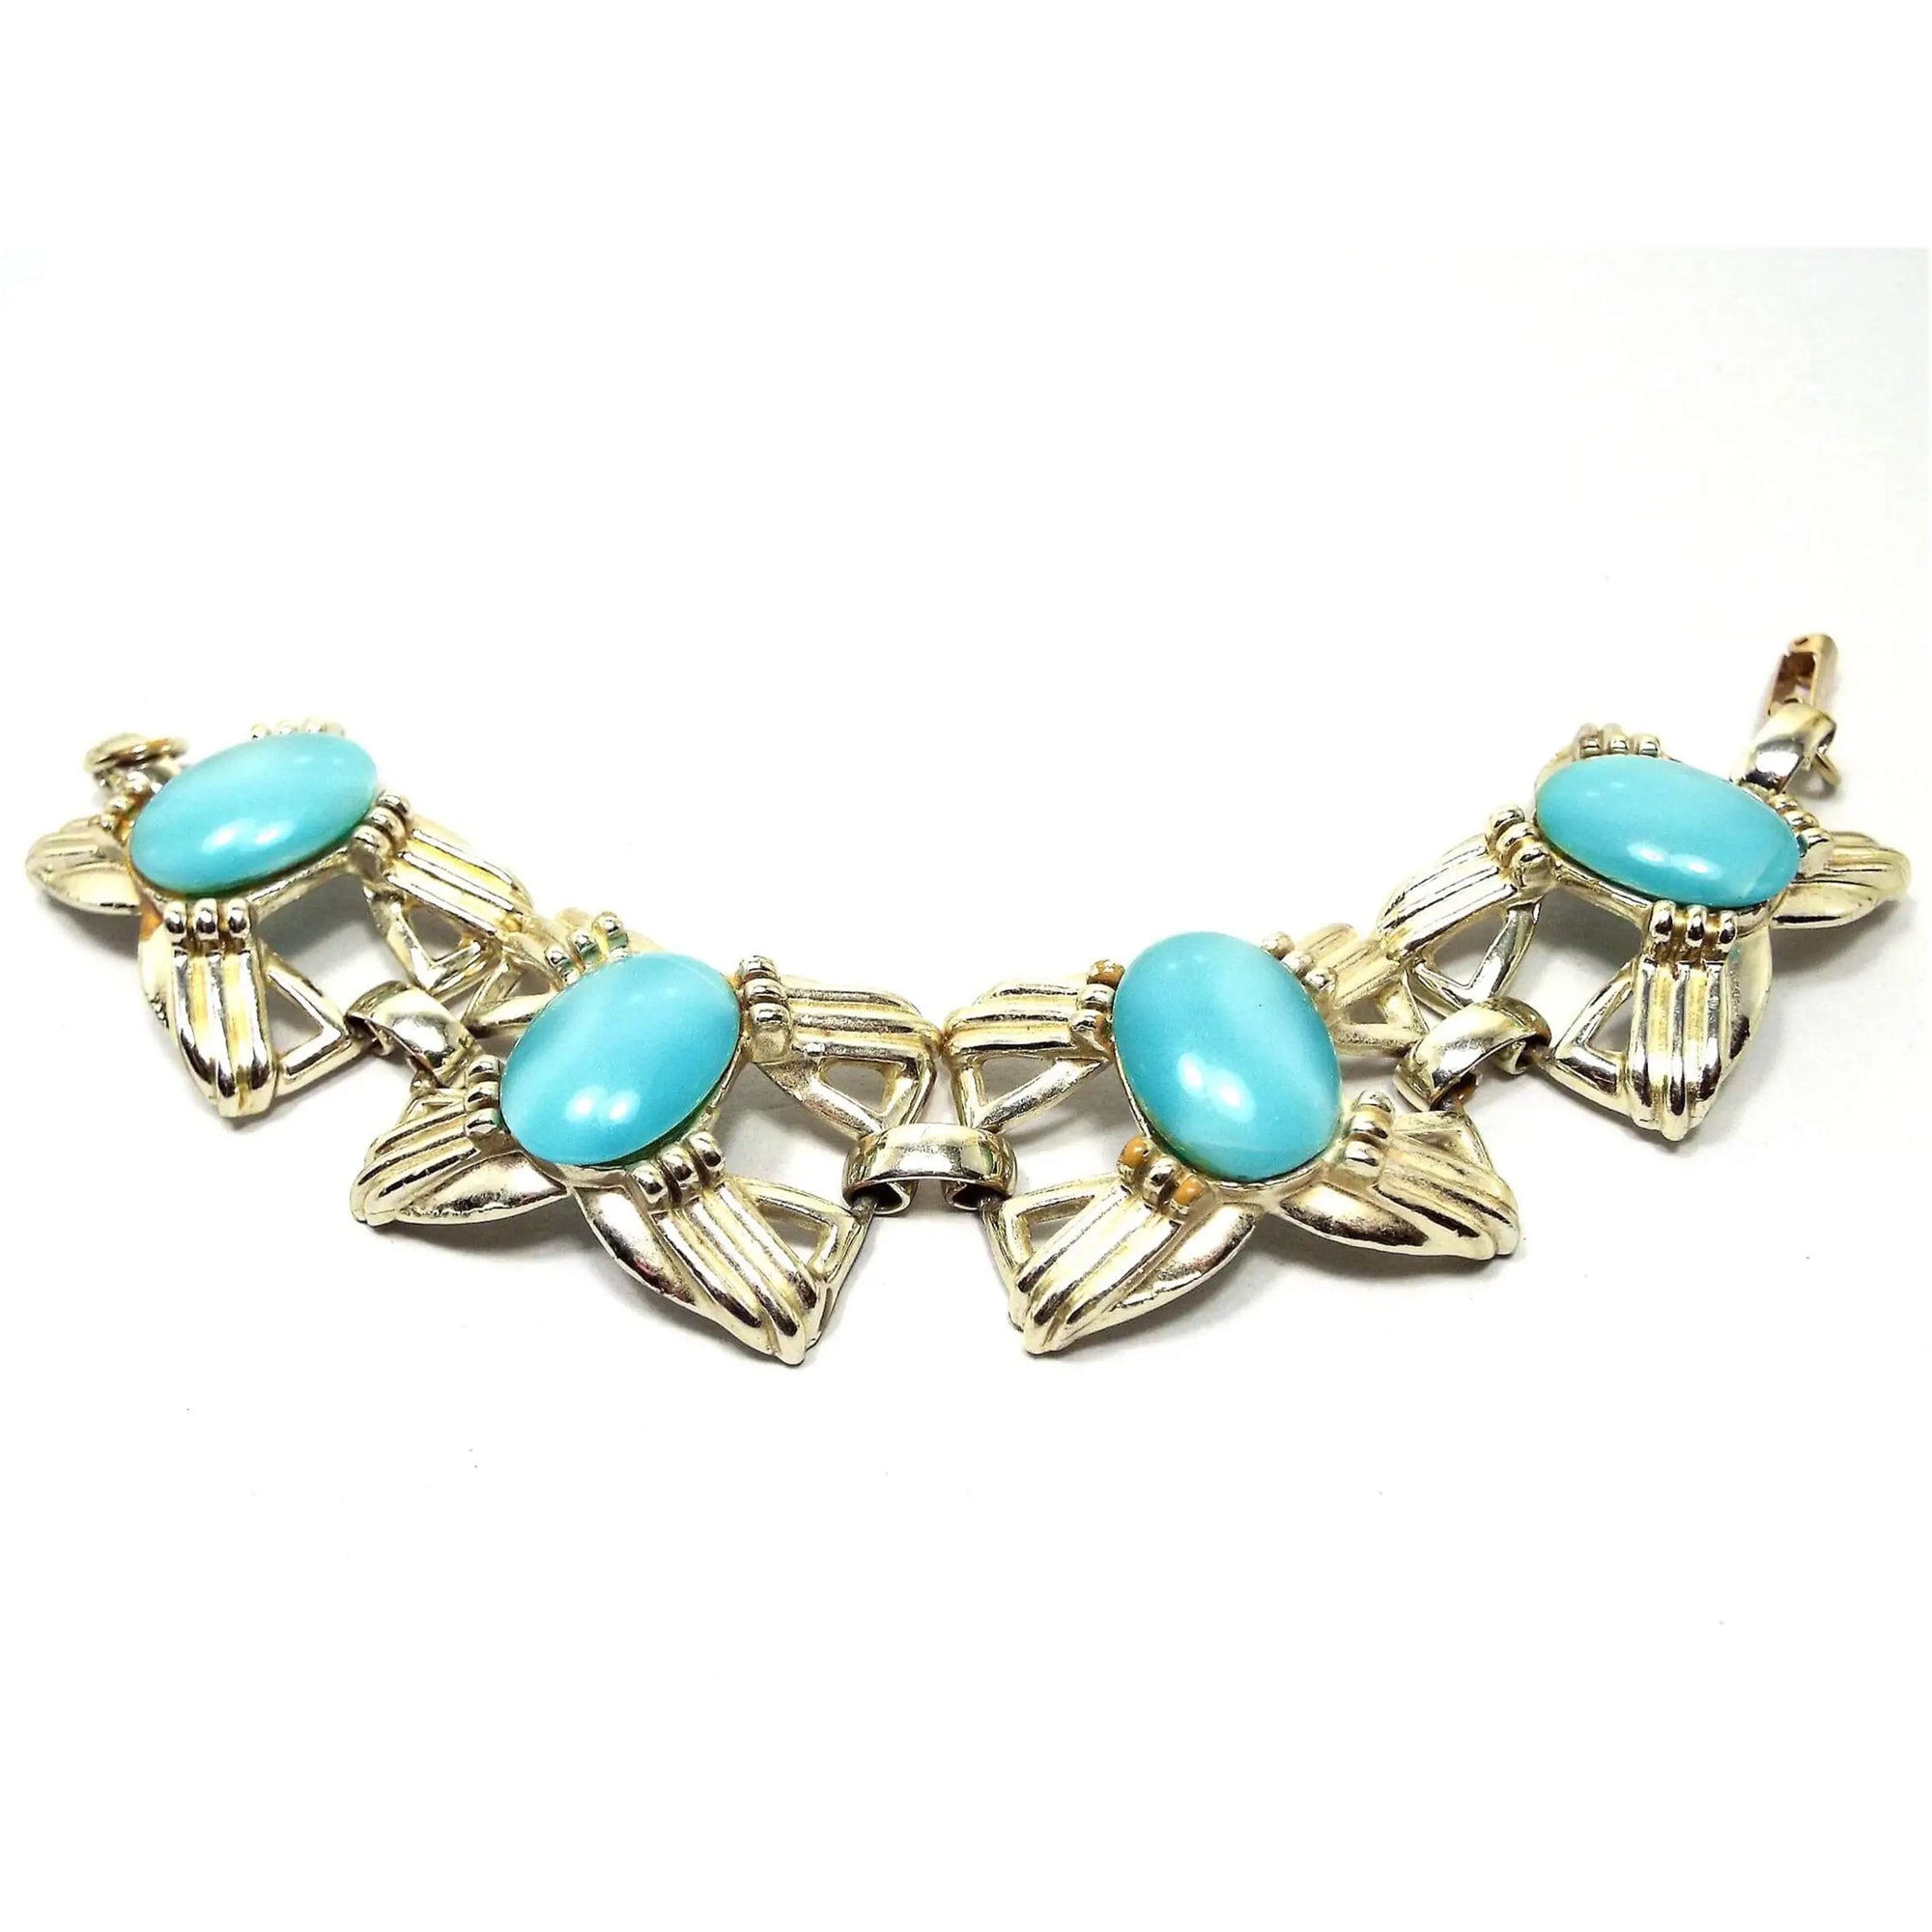 Top view of the Mid Century vintage link bracelet with glass faux cat's eye cabs. The metal is a light gold tone in color and has large bow like shaped open links. There are large oval glass cabs in aqua blue that have some flash as you move around in the light.